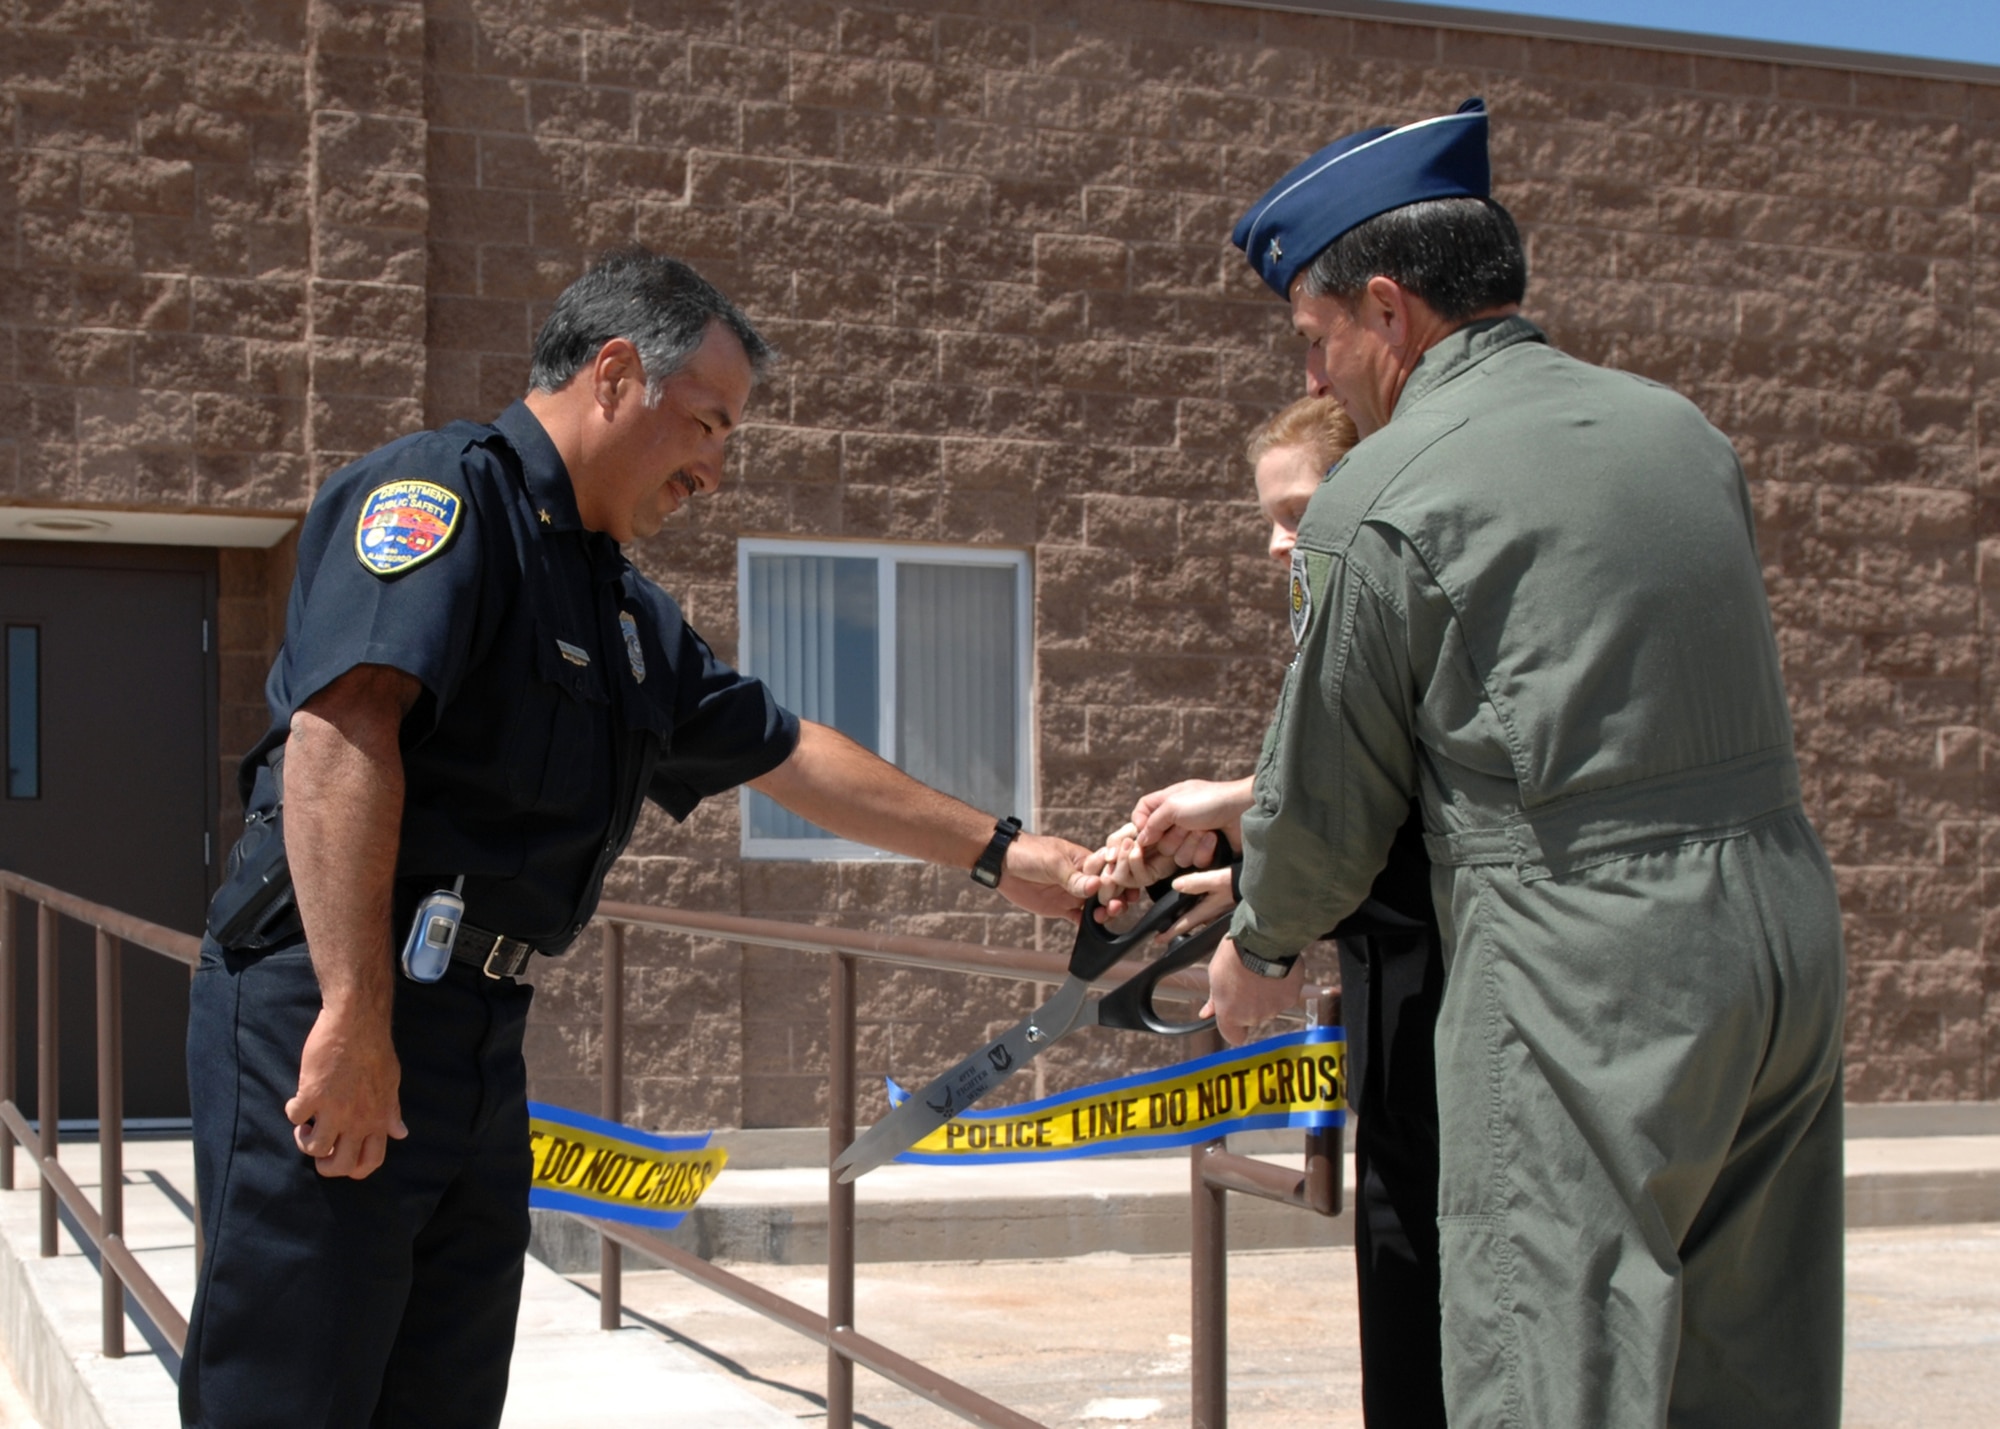 Brig. Gen. David Goldfein, 49th Fighter Wing commander, along with Sarena Carman, Detachment 225 superintendent, and Chief Sam Trujillo, director Alamogordo Department of Public Safety, cut the ribbon leading to the new Holloman Office of Special Investigations building. (U.S. Air Force photo by Airman 1st Class Jamal Sutter)